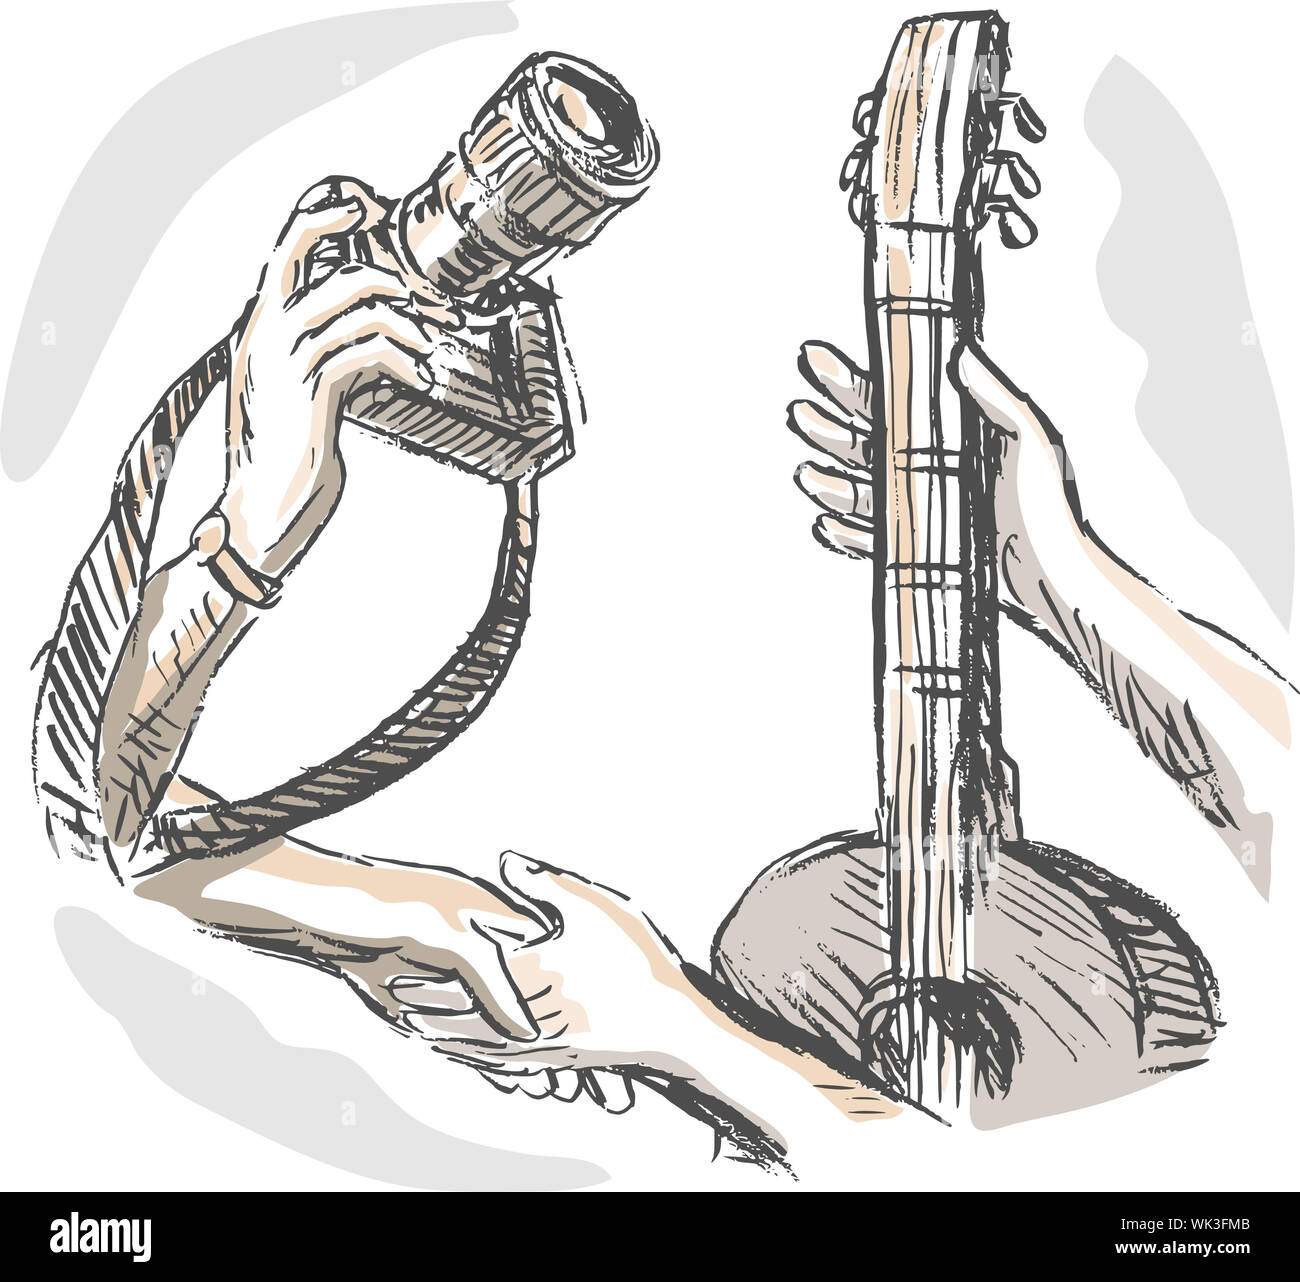 hand sketched illustration of Barter swapping hands with camera and guitar Stock Photo